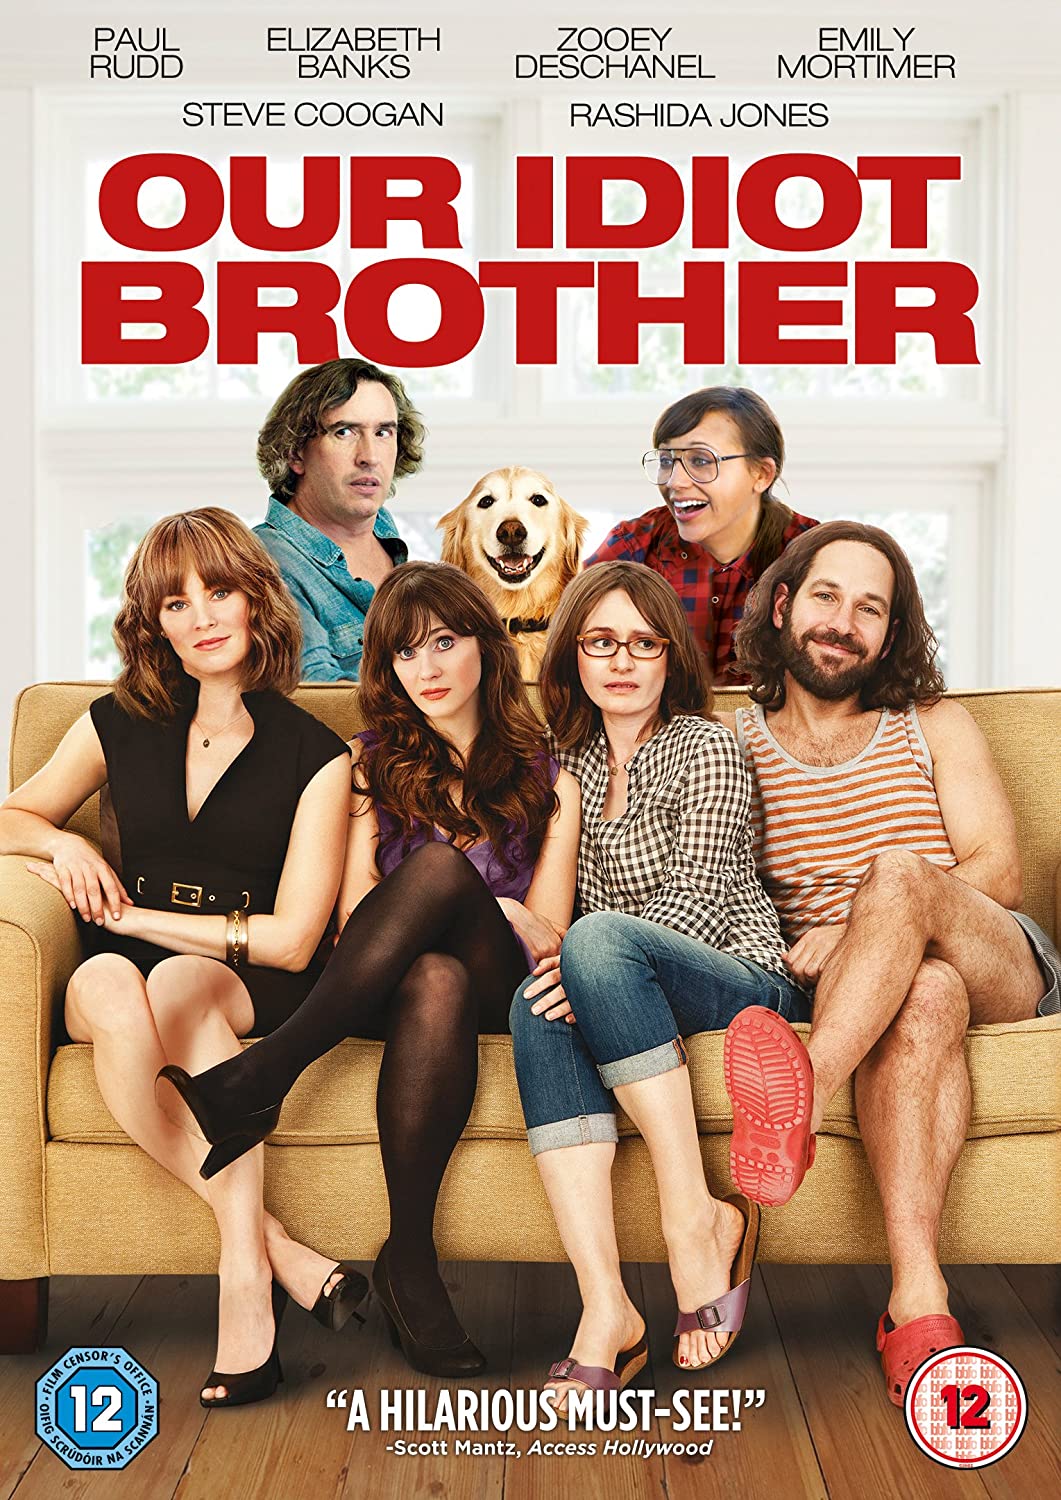 Our Idiot Brother - Comedy [DVD]